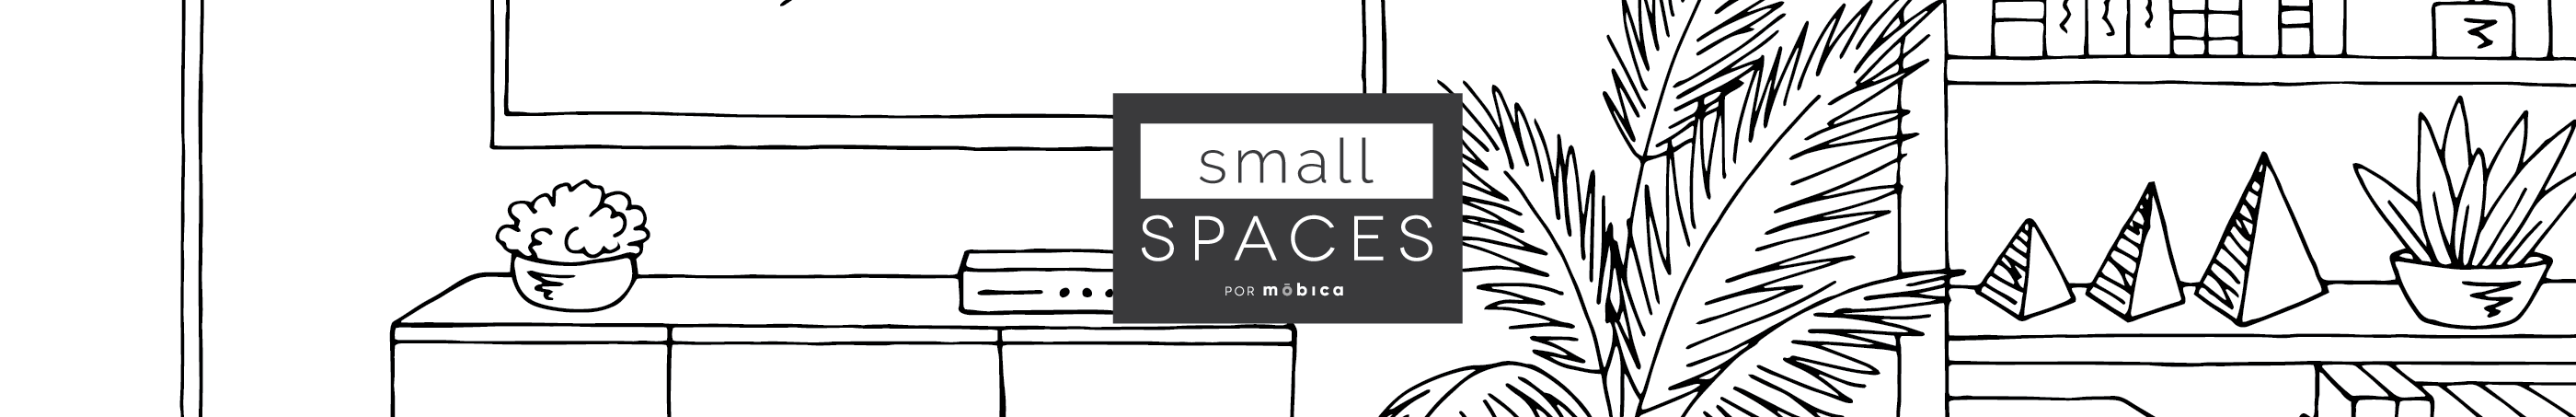 Small spaces